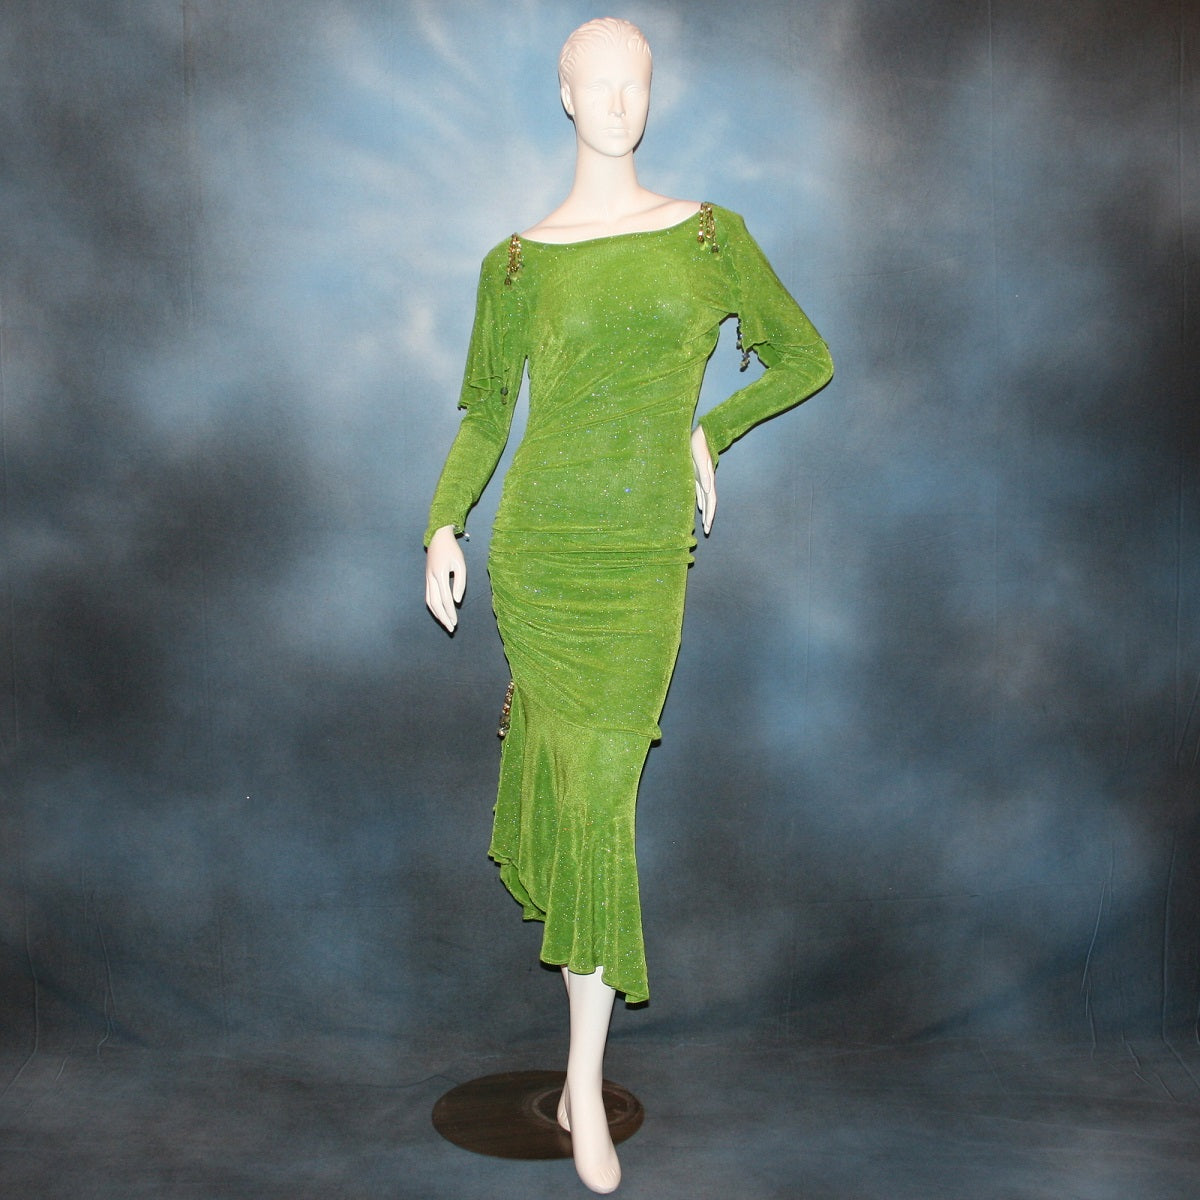 Apple green social Latin/rhythm dress was created of apple green glitter slinky, features ruching on the right side, long sleeves, scoop back, & full skirting with open side that has Swarovski hand beaded detail